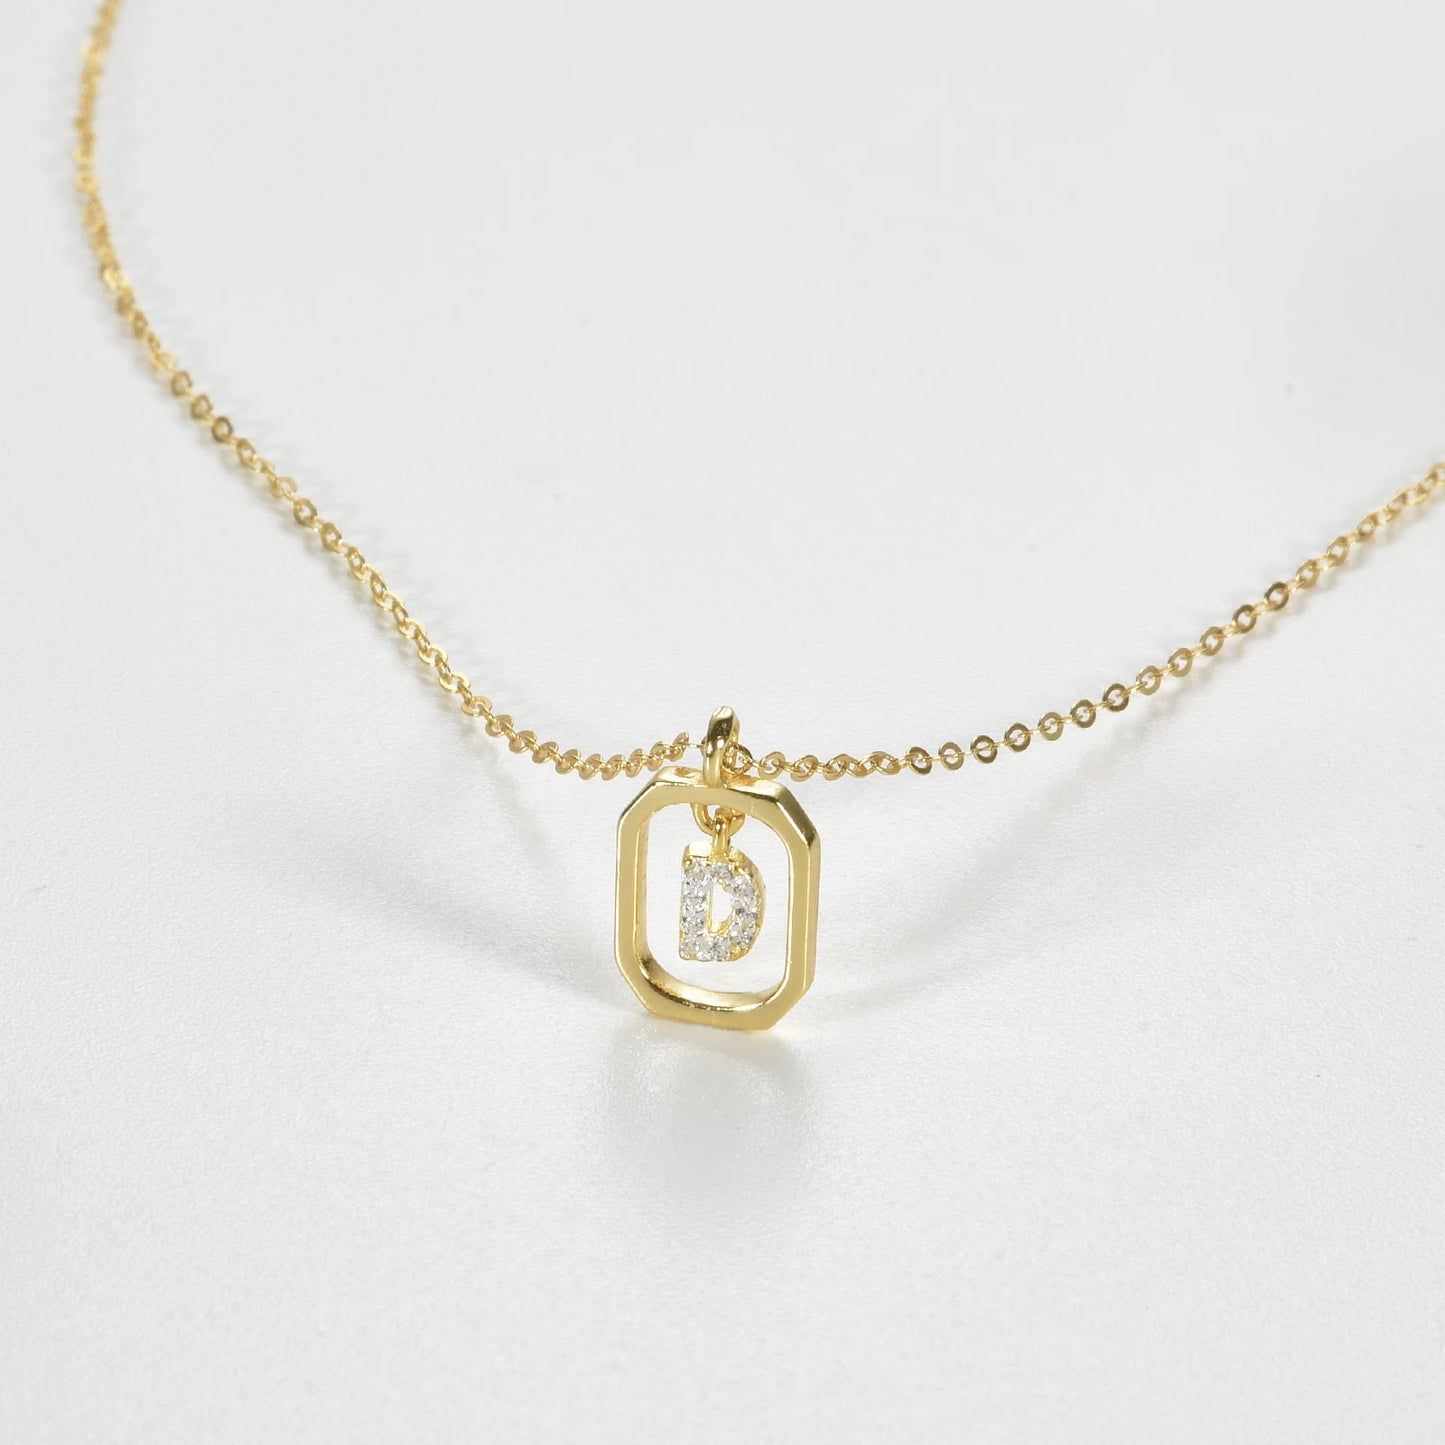 IceBox DC Personalized Collection - Gold Initial with Zirconia Alphabet Pendant Necklace - Letters A-Z - Hip Hop Fashion Jewelry